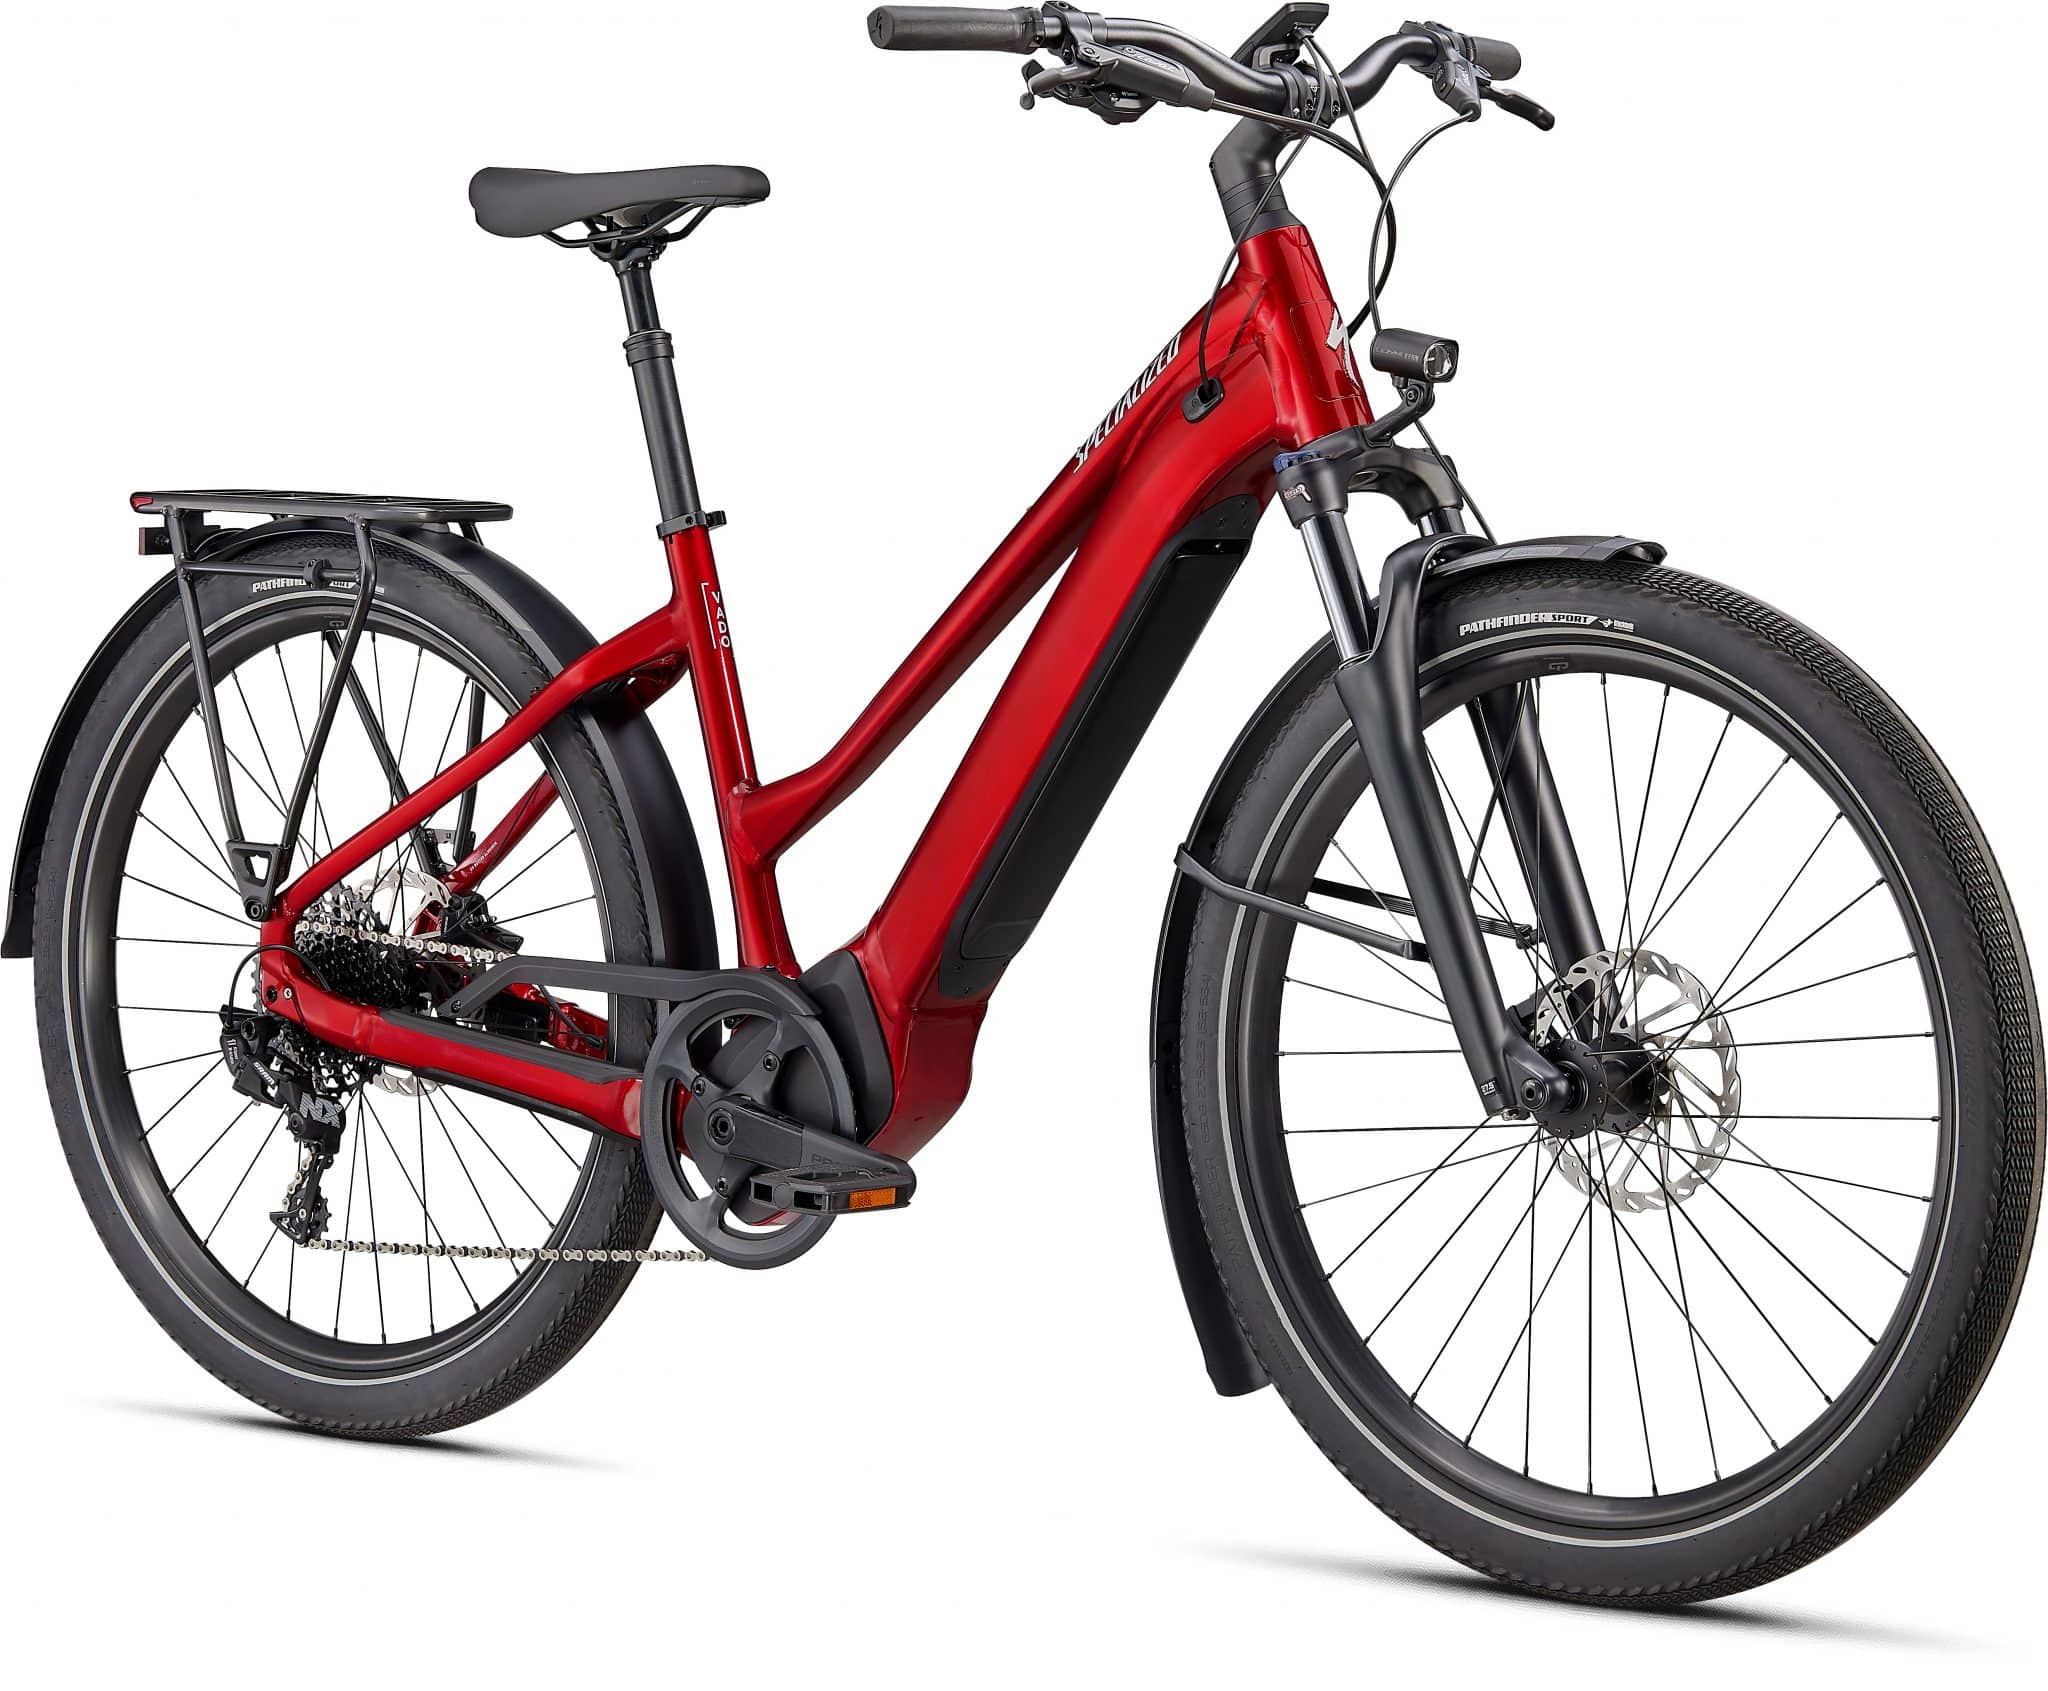 2022 Specialized Turbo Vado low-step e-bike with anti-theft and Garmin Radar features to make it safe and secure.